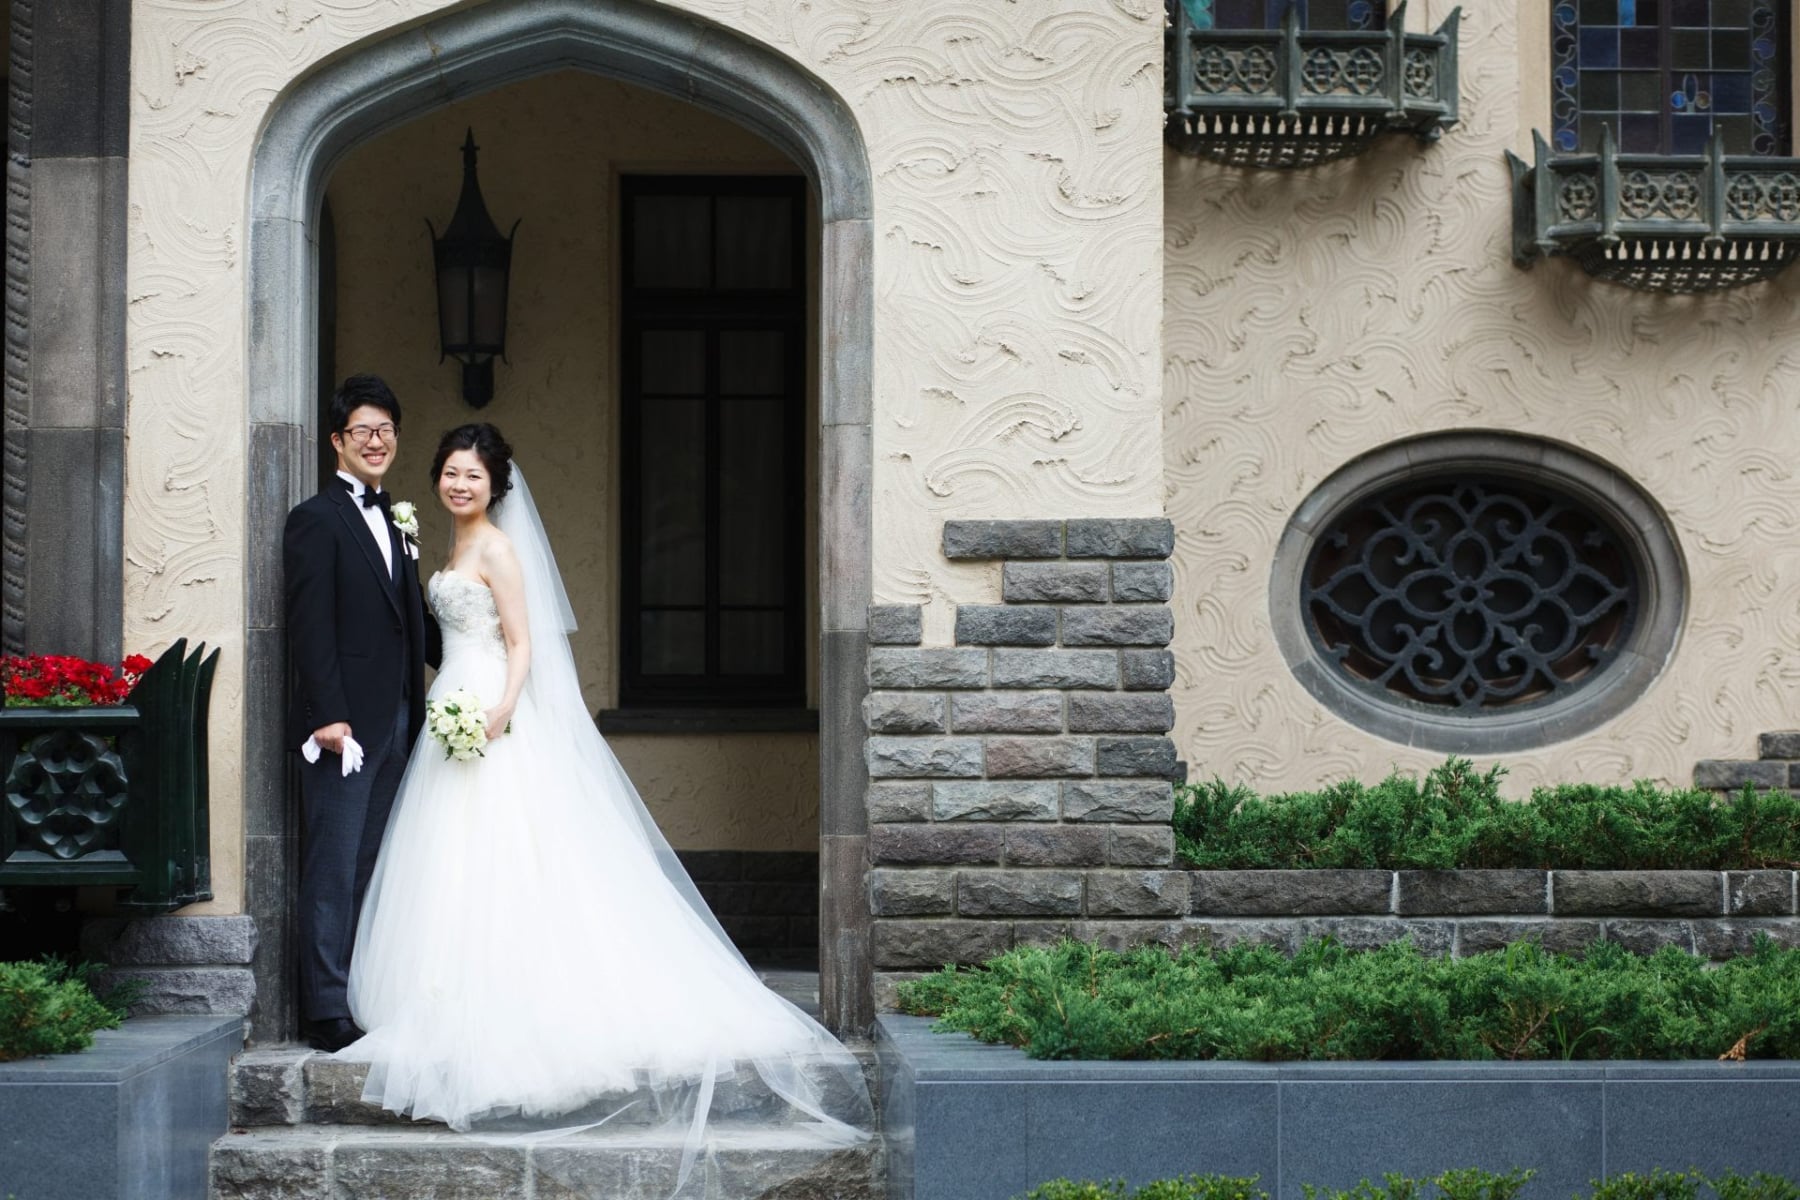 RYO&YUKI [Wedding to express gratitude] Fulfill your hopes and thoughts in a classic house